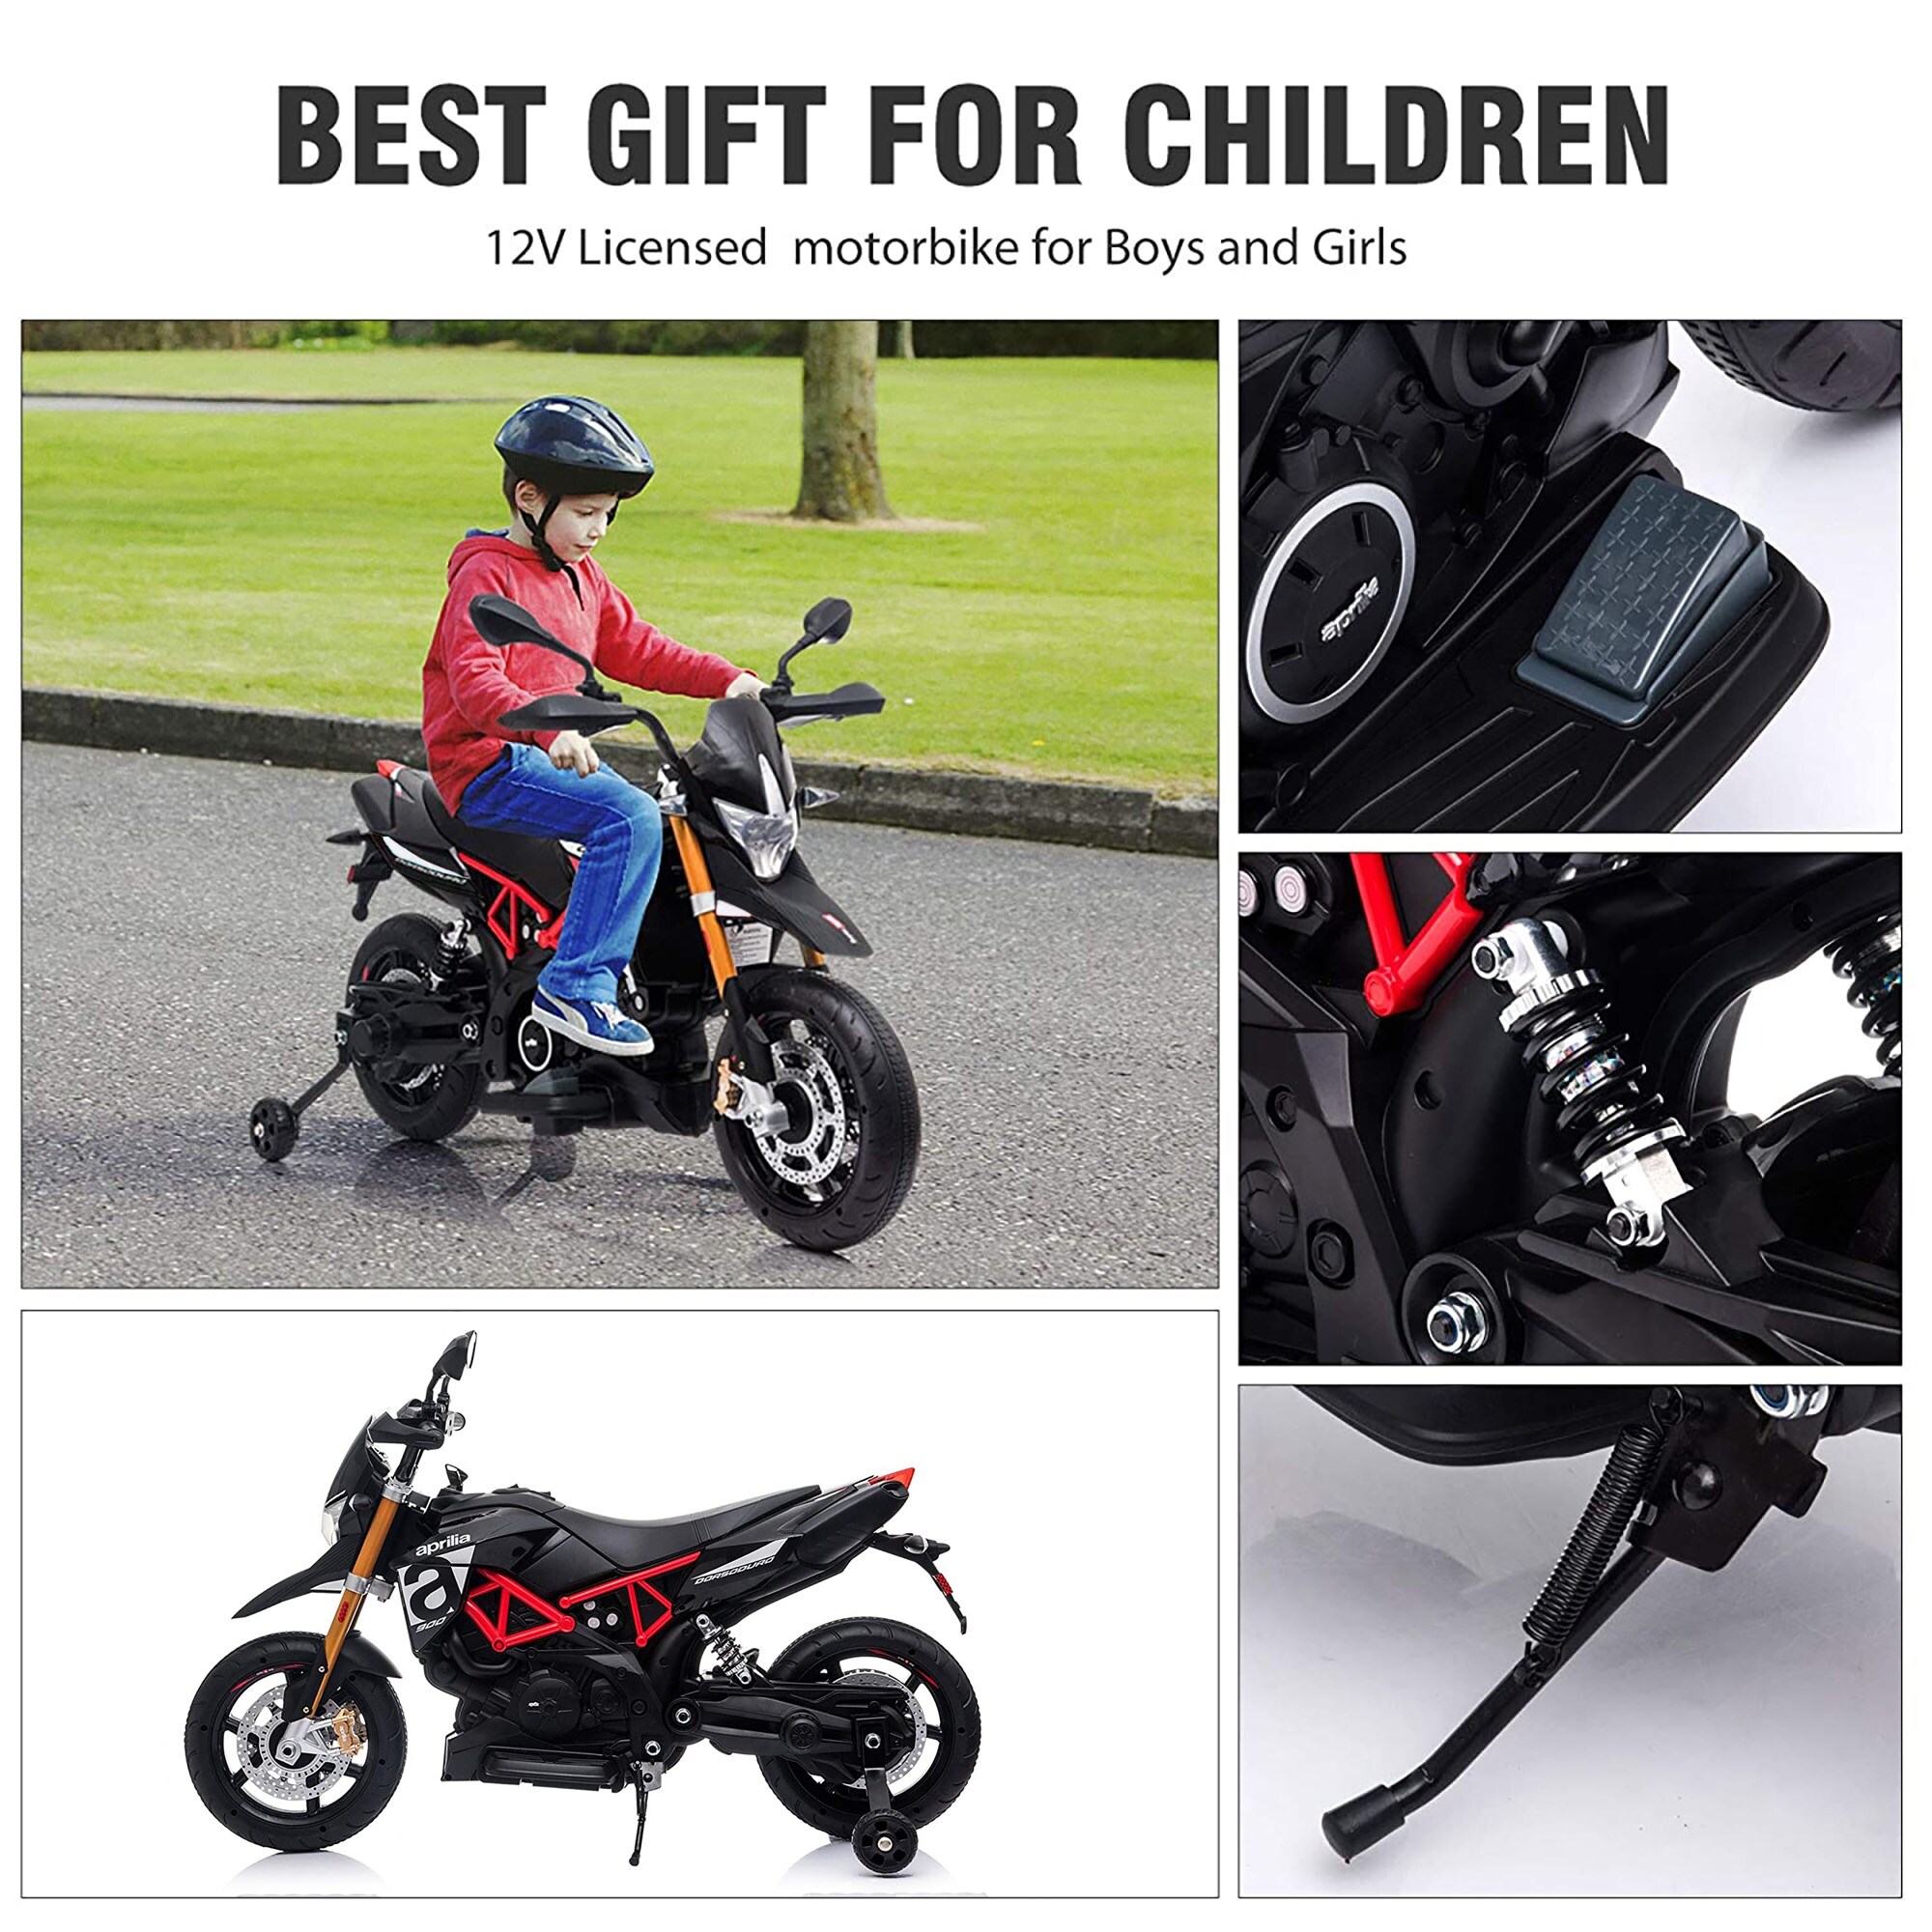 TOBBI Battery Powered Ride On Aprilia Motorcycle for Ages 3 Years and Up, Black - 22